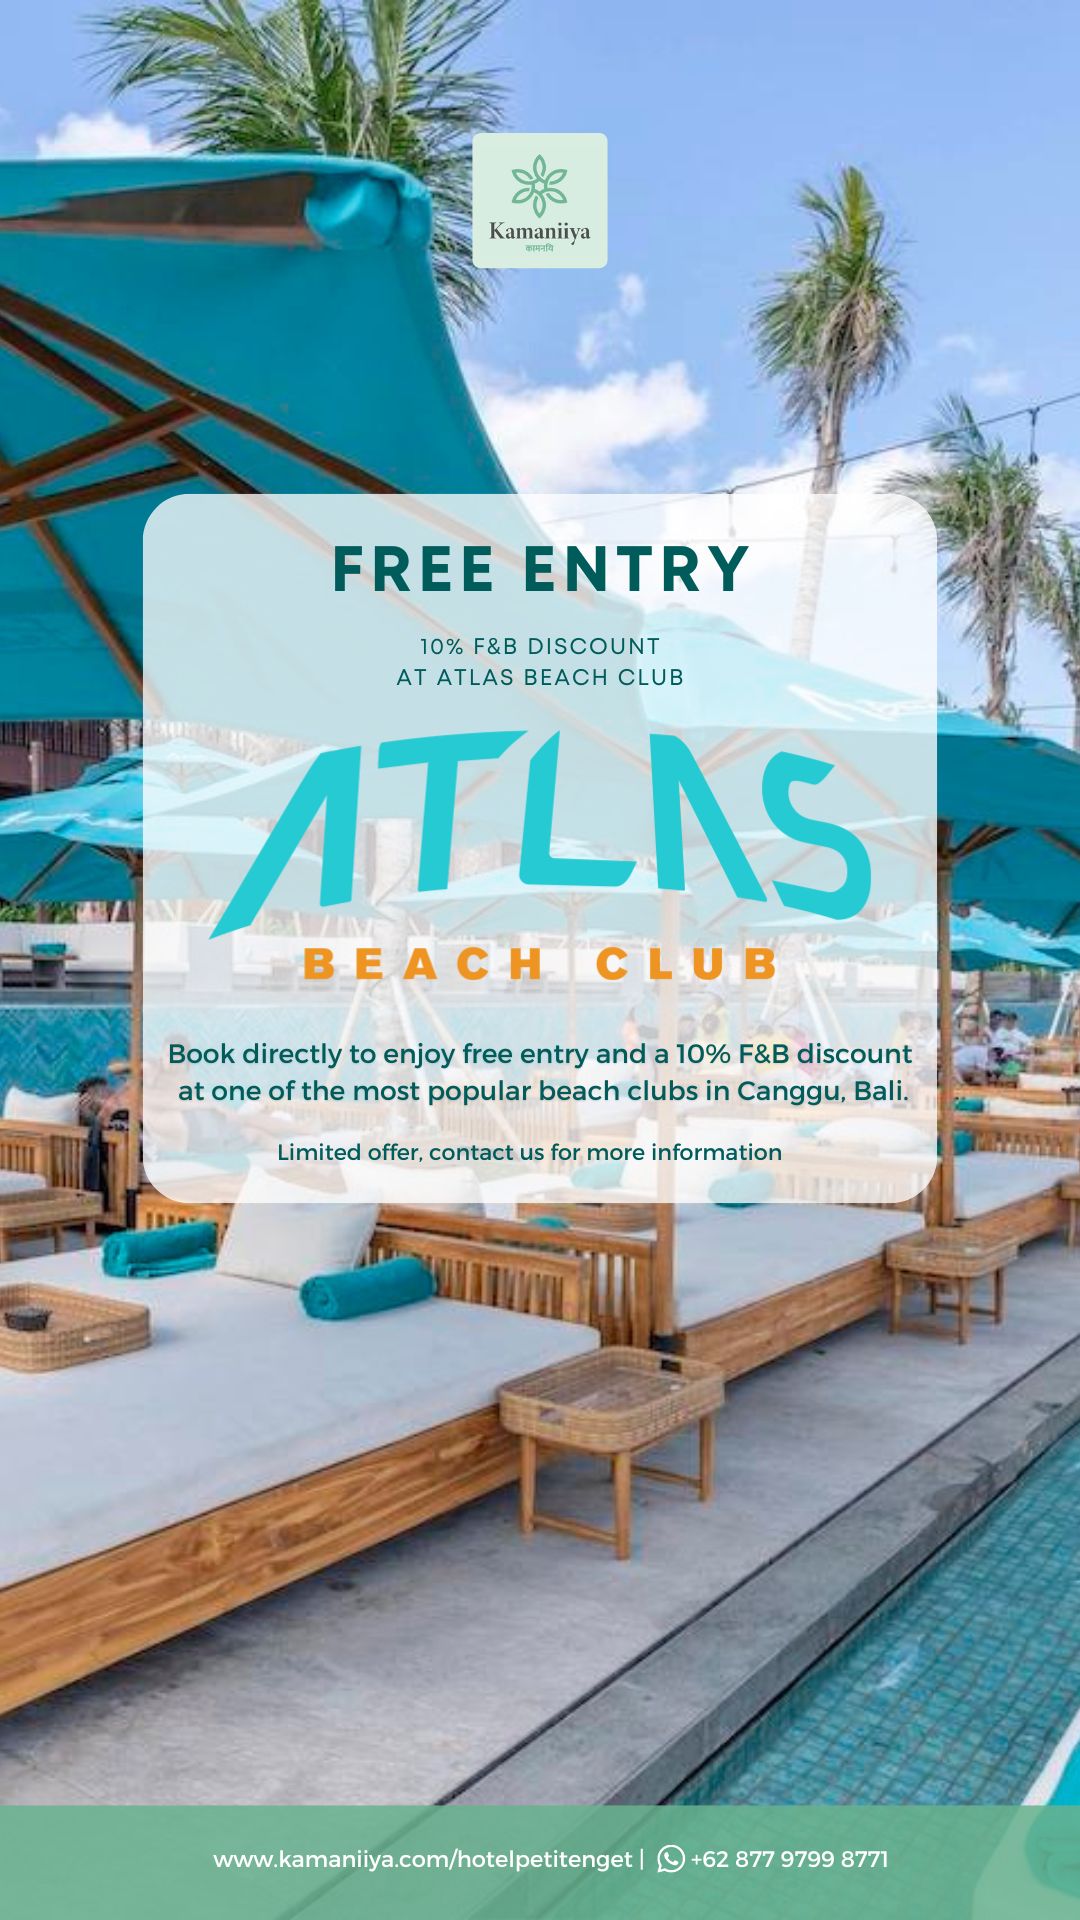 Free entry and get disc. 10% F&B purchase at Atlas Beach Club.